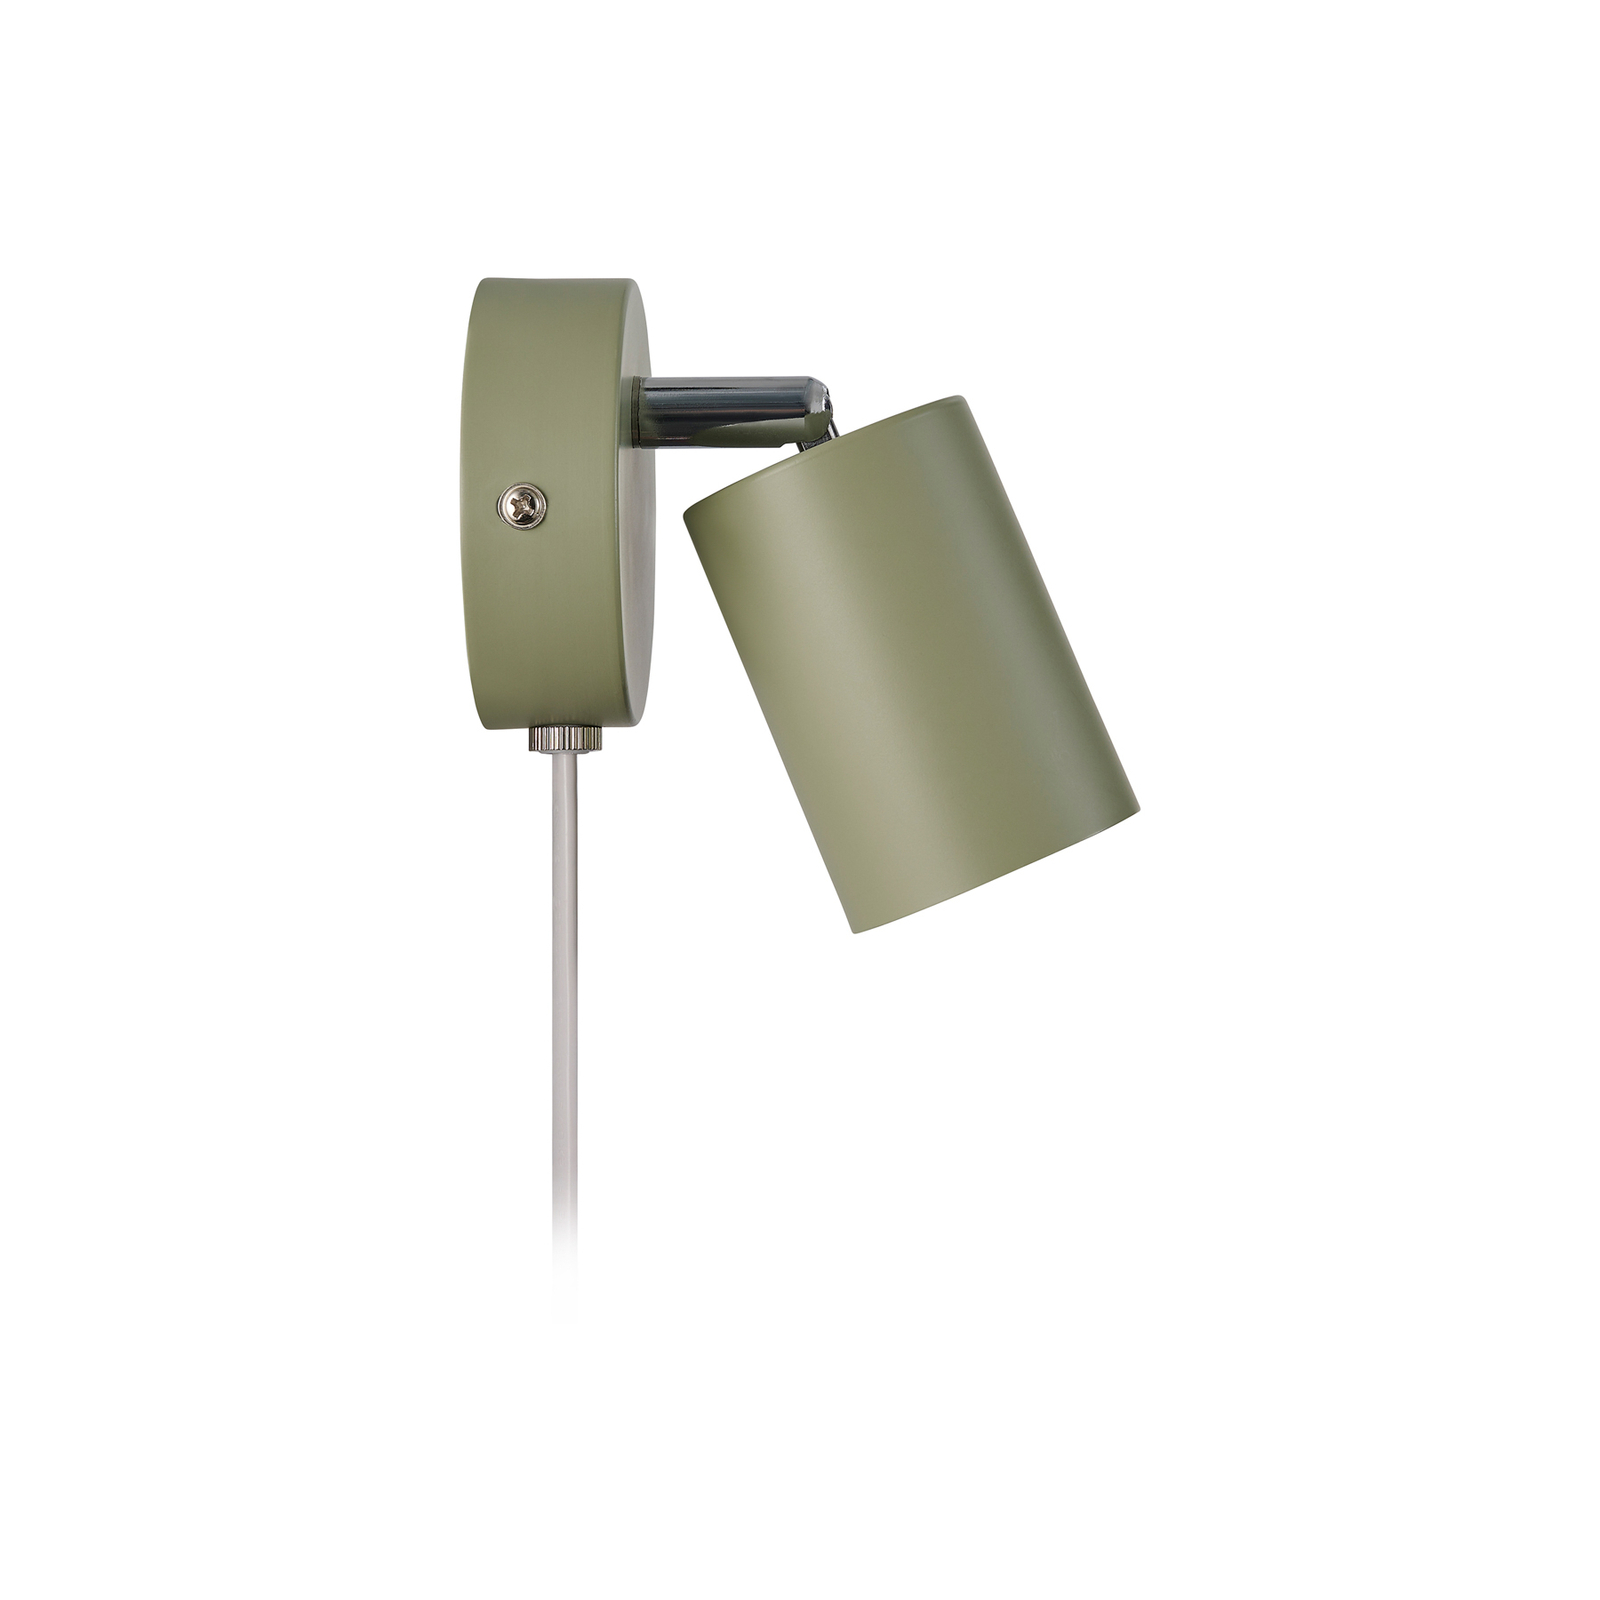 Explore wall spotlight with cable and plug, GU10, green